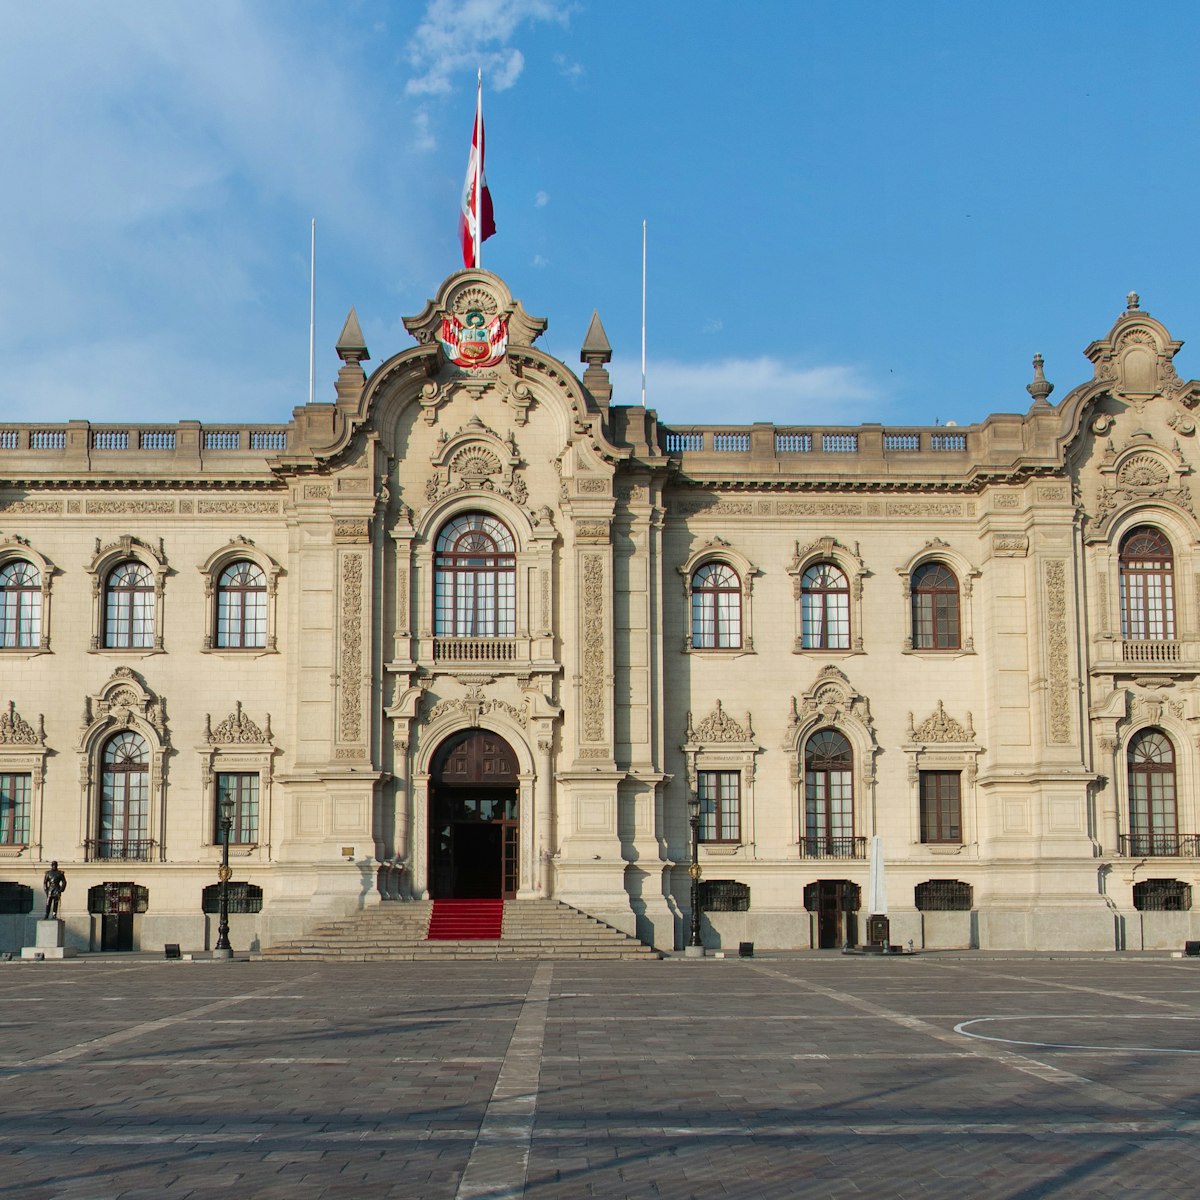 Government Palace in Lima Peru; Shutterstock ID 91332674; Your name (First / Last): Josh Vogel; GL account no.: 56530; Netsuite department name: Online Design; Full Product or Project name including edition: Digital Content/Sights